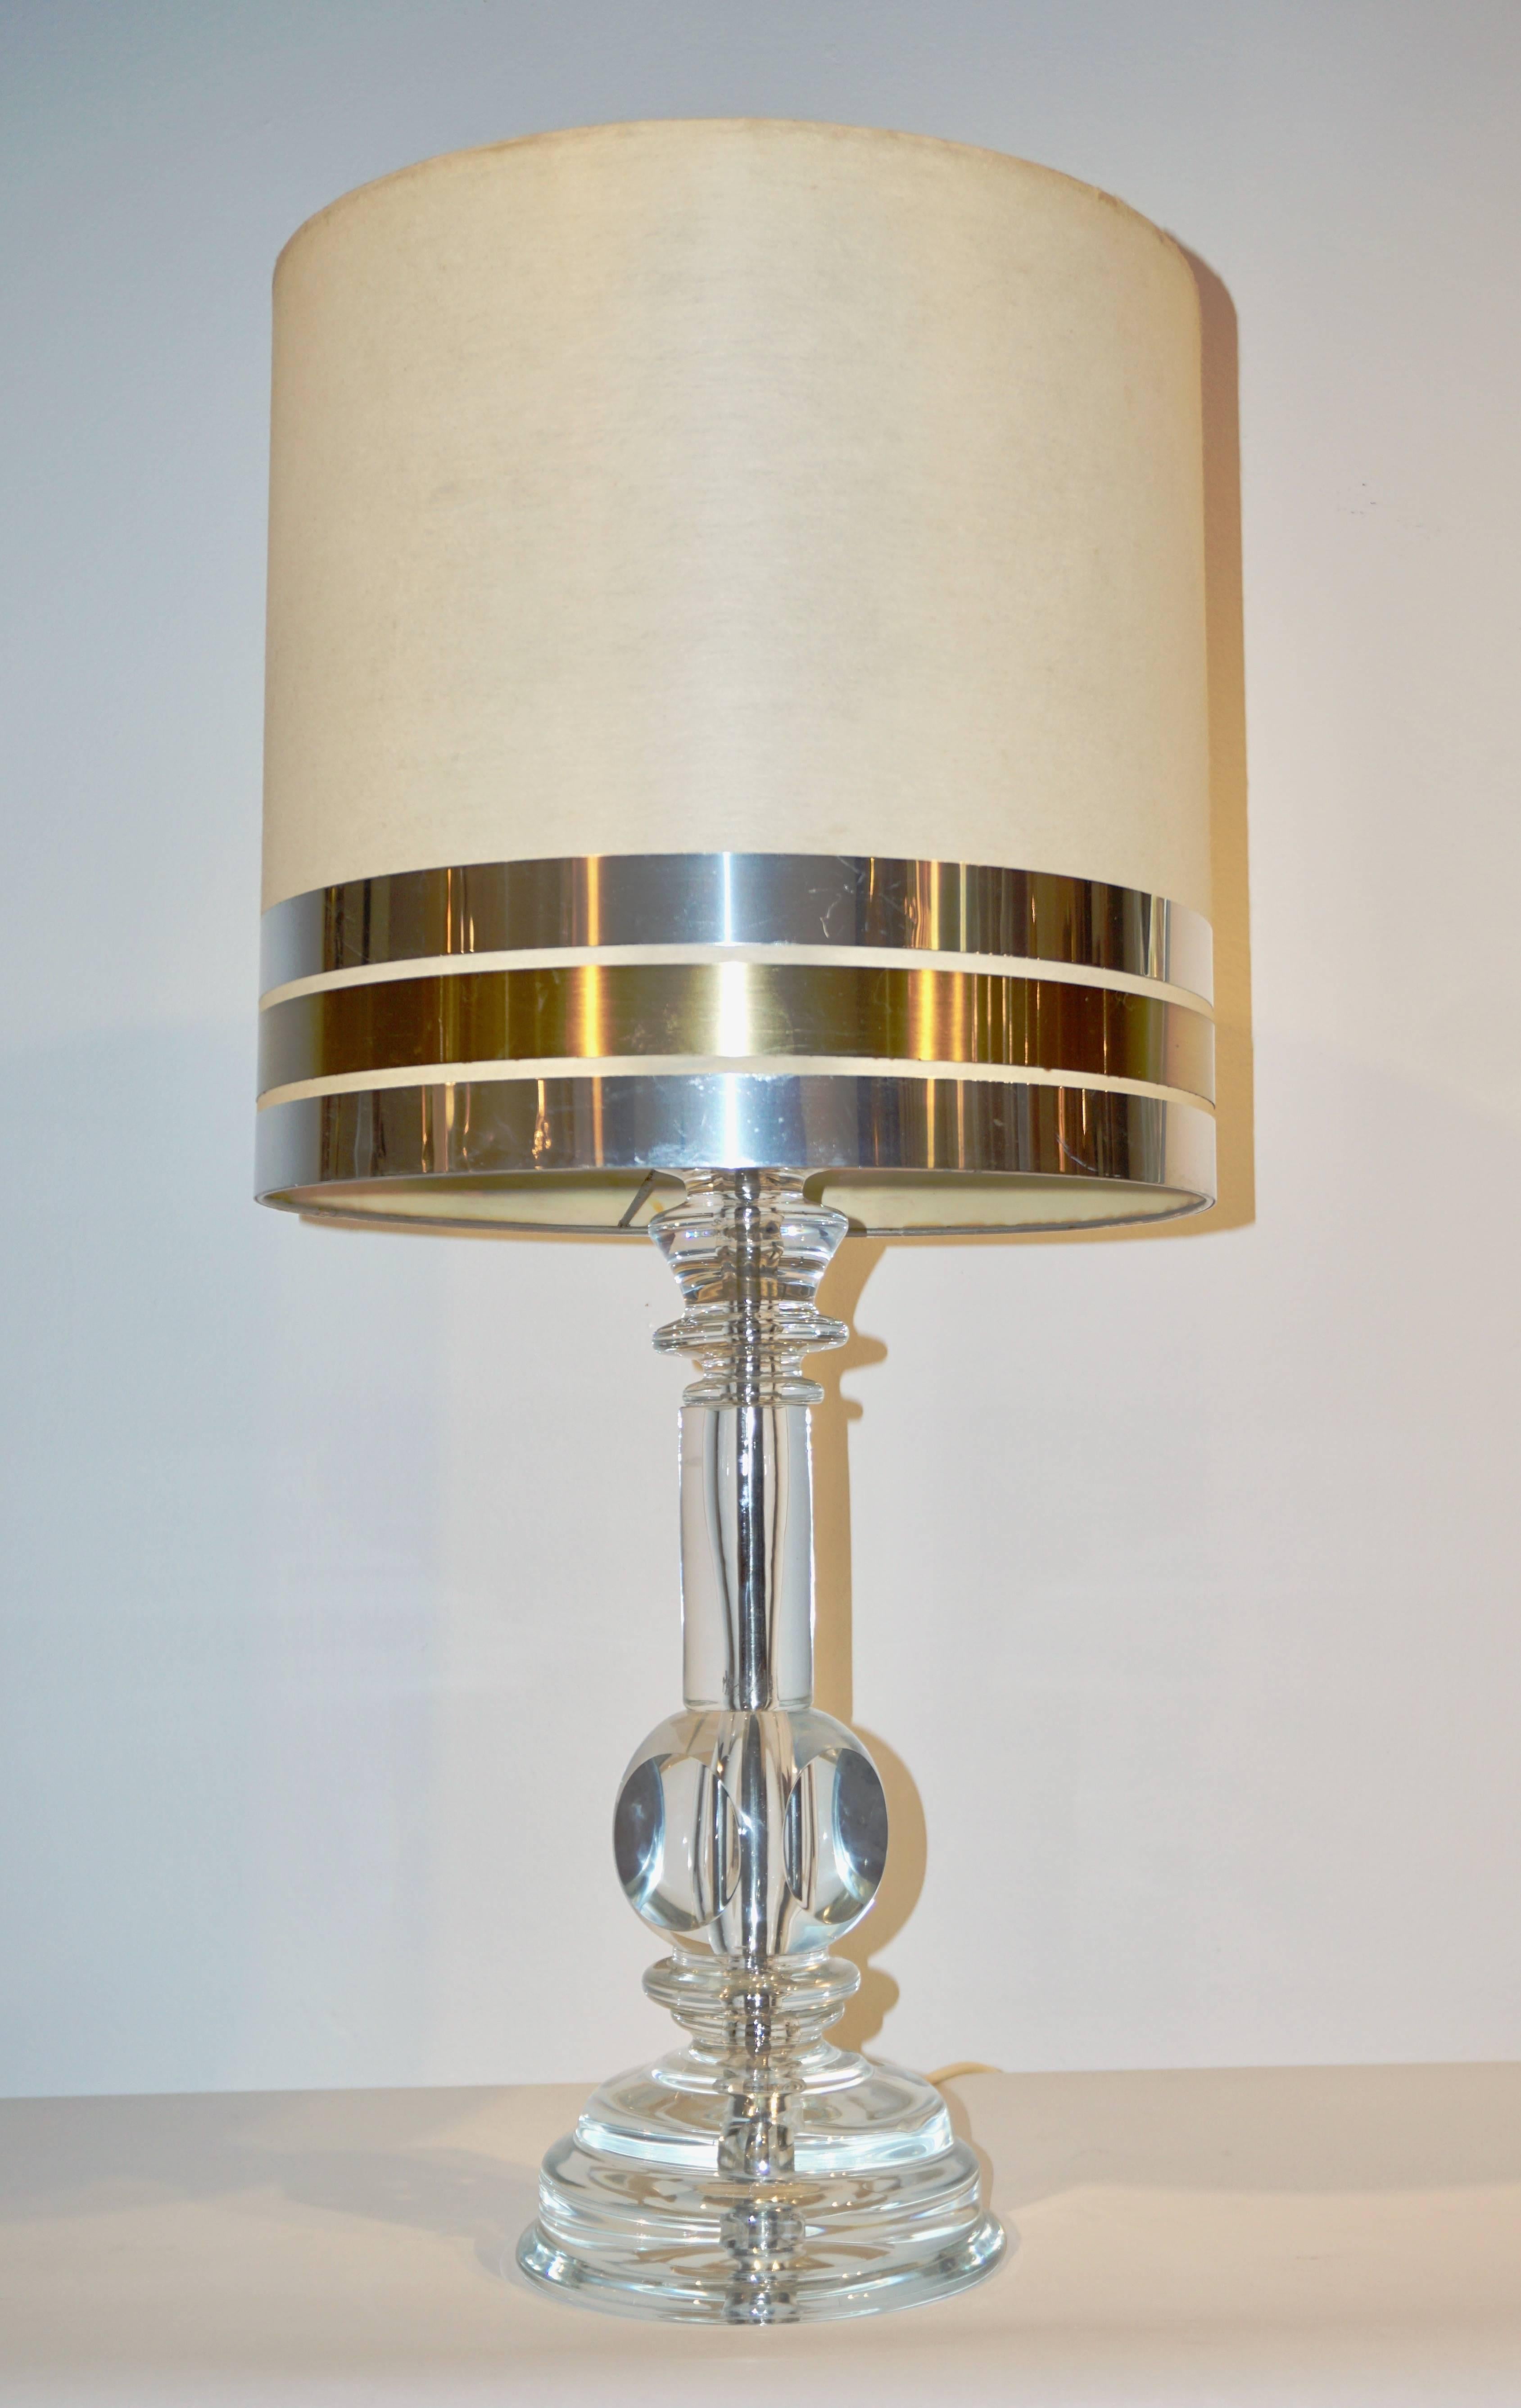 Italian, 1970s pair of vintage table lamps in high quality sparkling crystal with a sleek modern design. The handcut crystal stepped bases are individually handcrafted in a whole piece surmounted by cubes with sophisticated cut sides. A very elegant